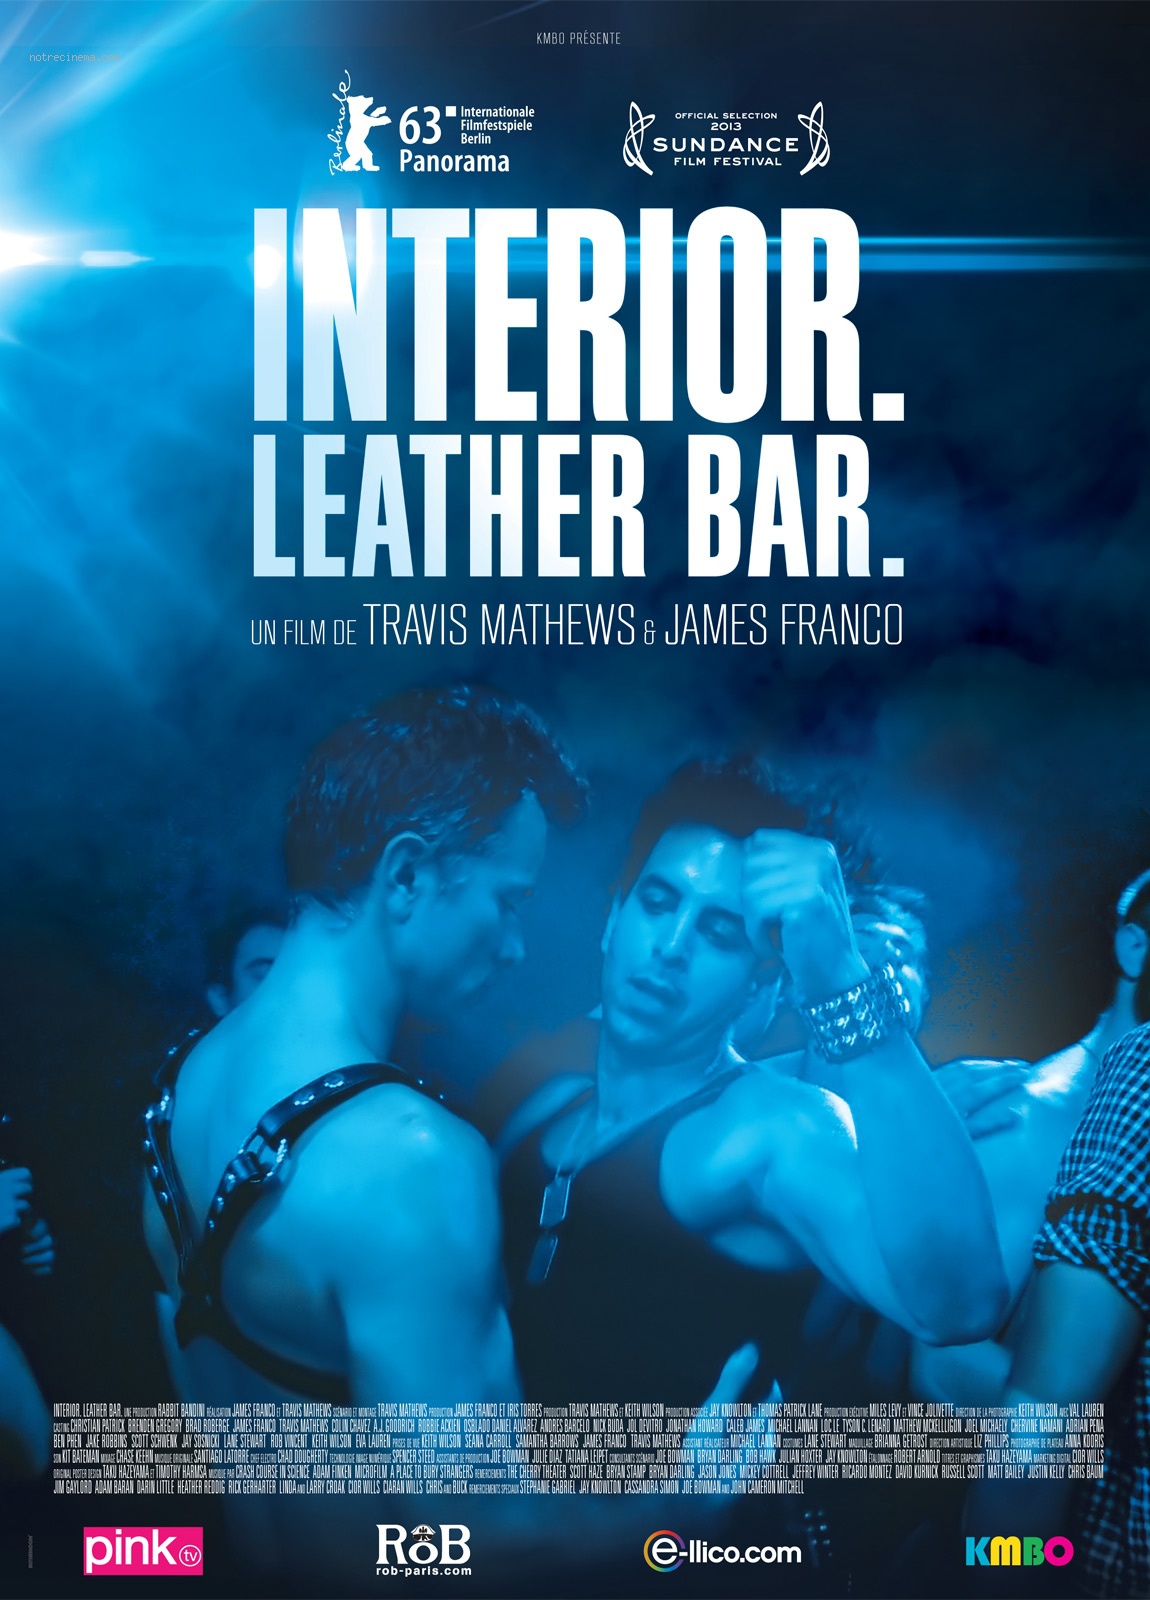  Interior. Leather Bar. (2013) Poster 